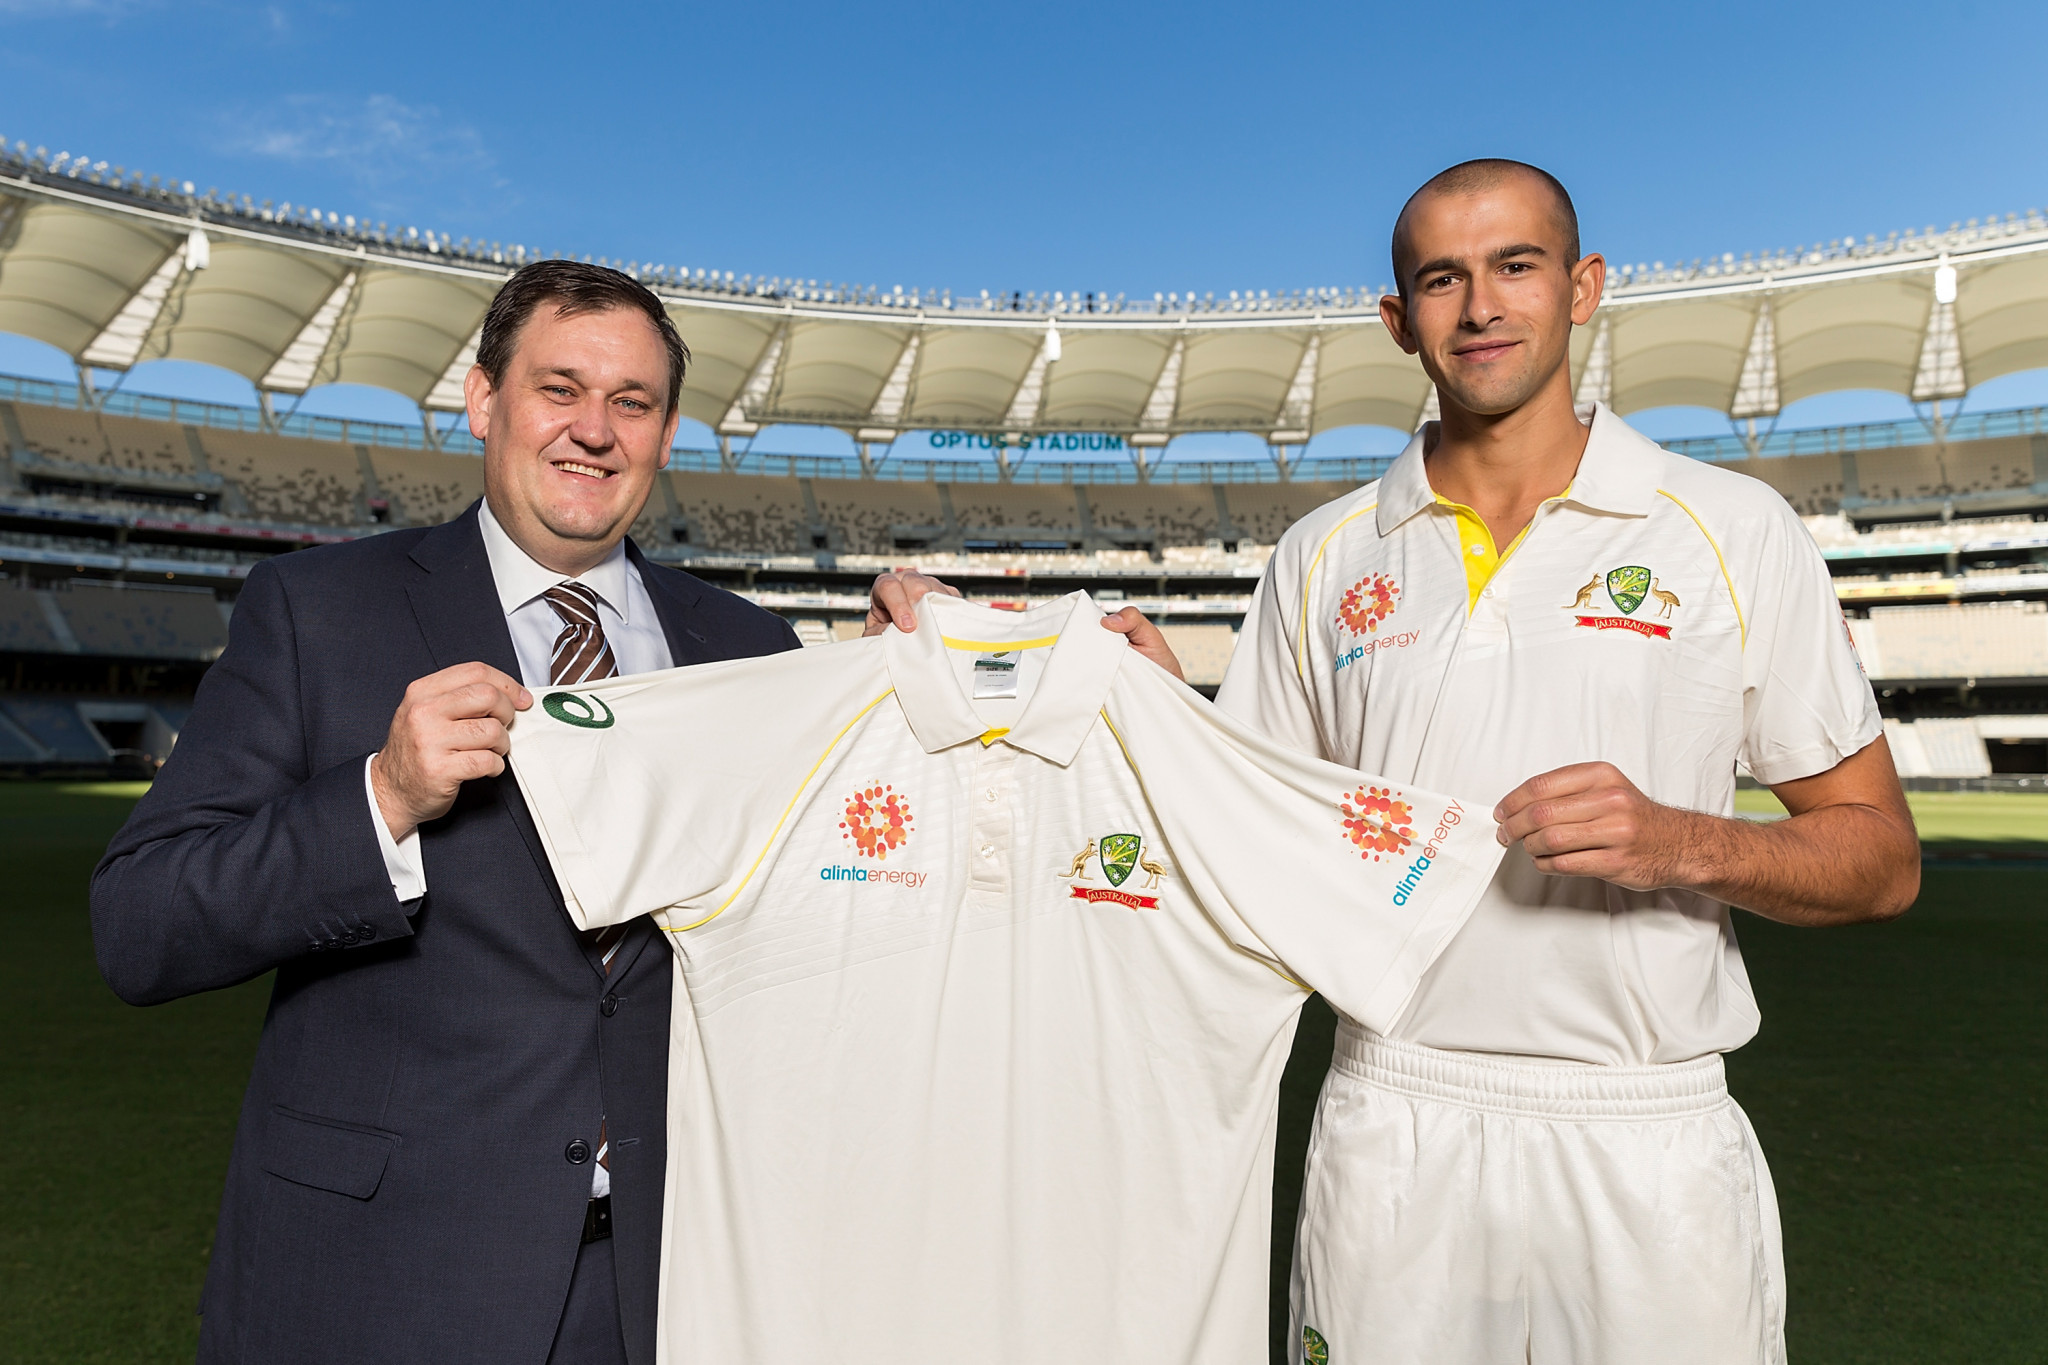 Alinta Energy has signed a major deal with Cricket Australia ©Getty Images 